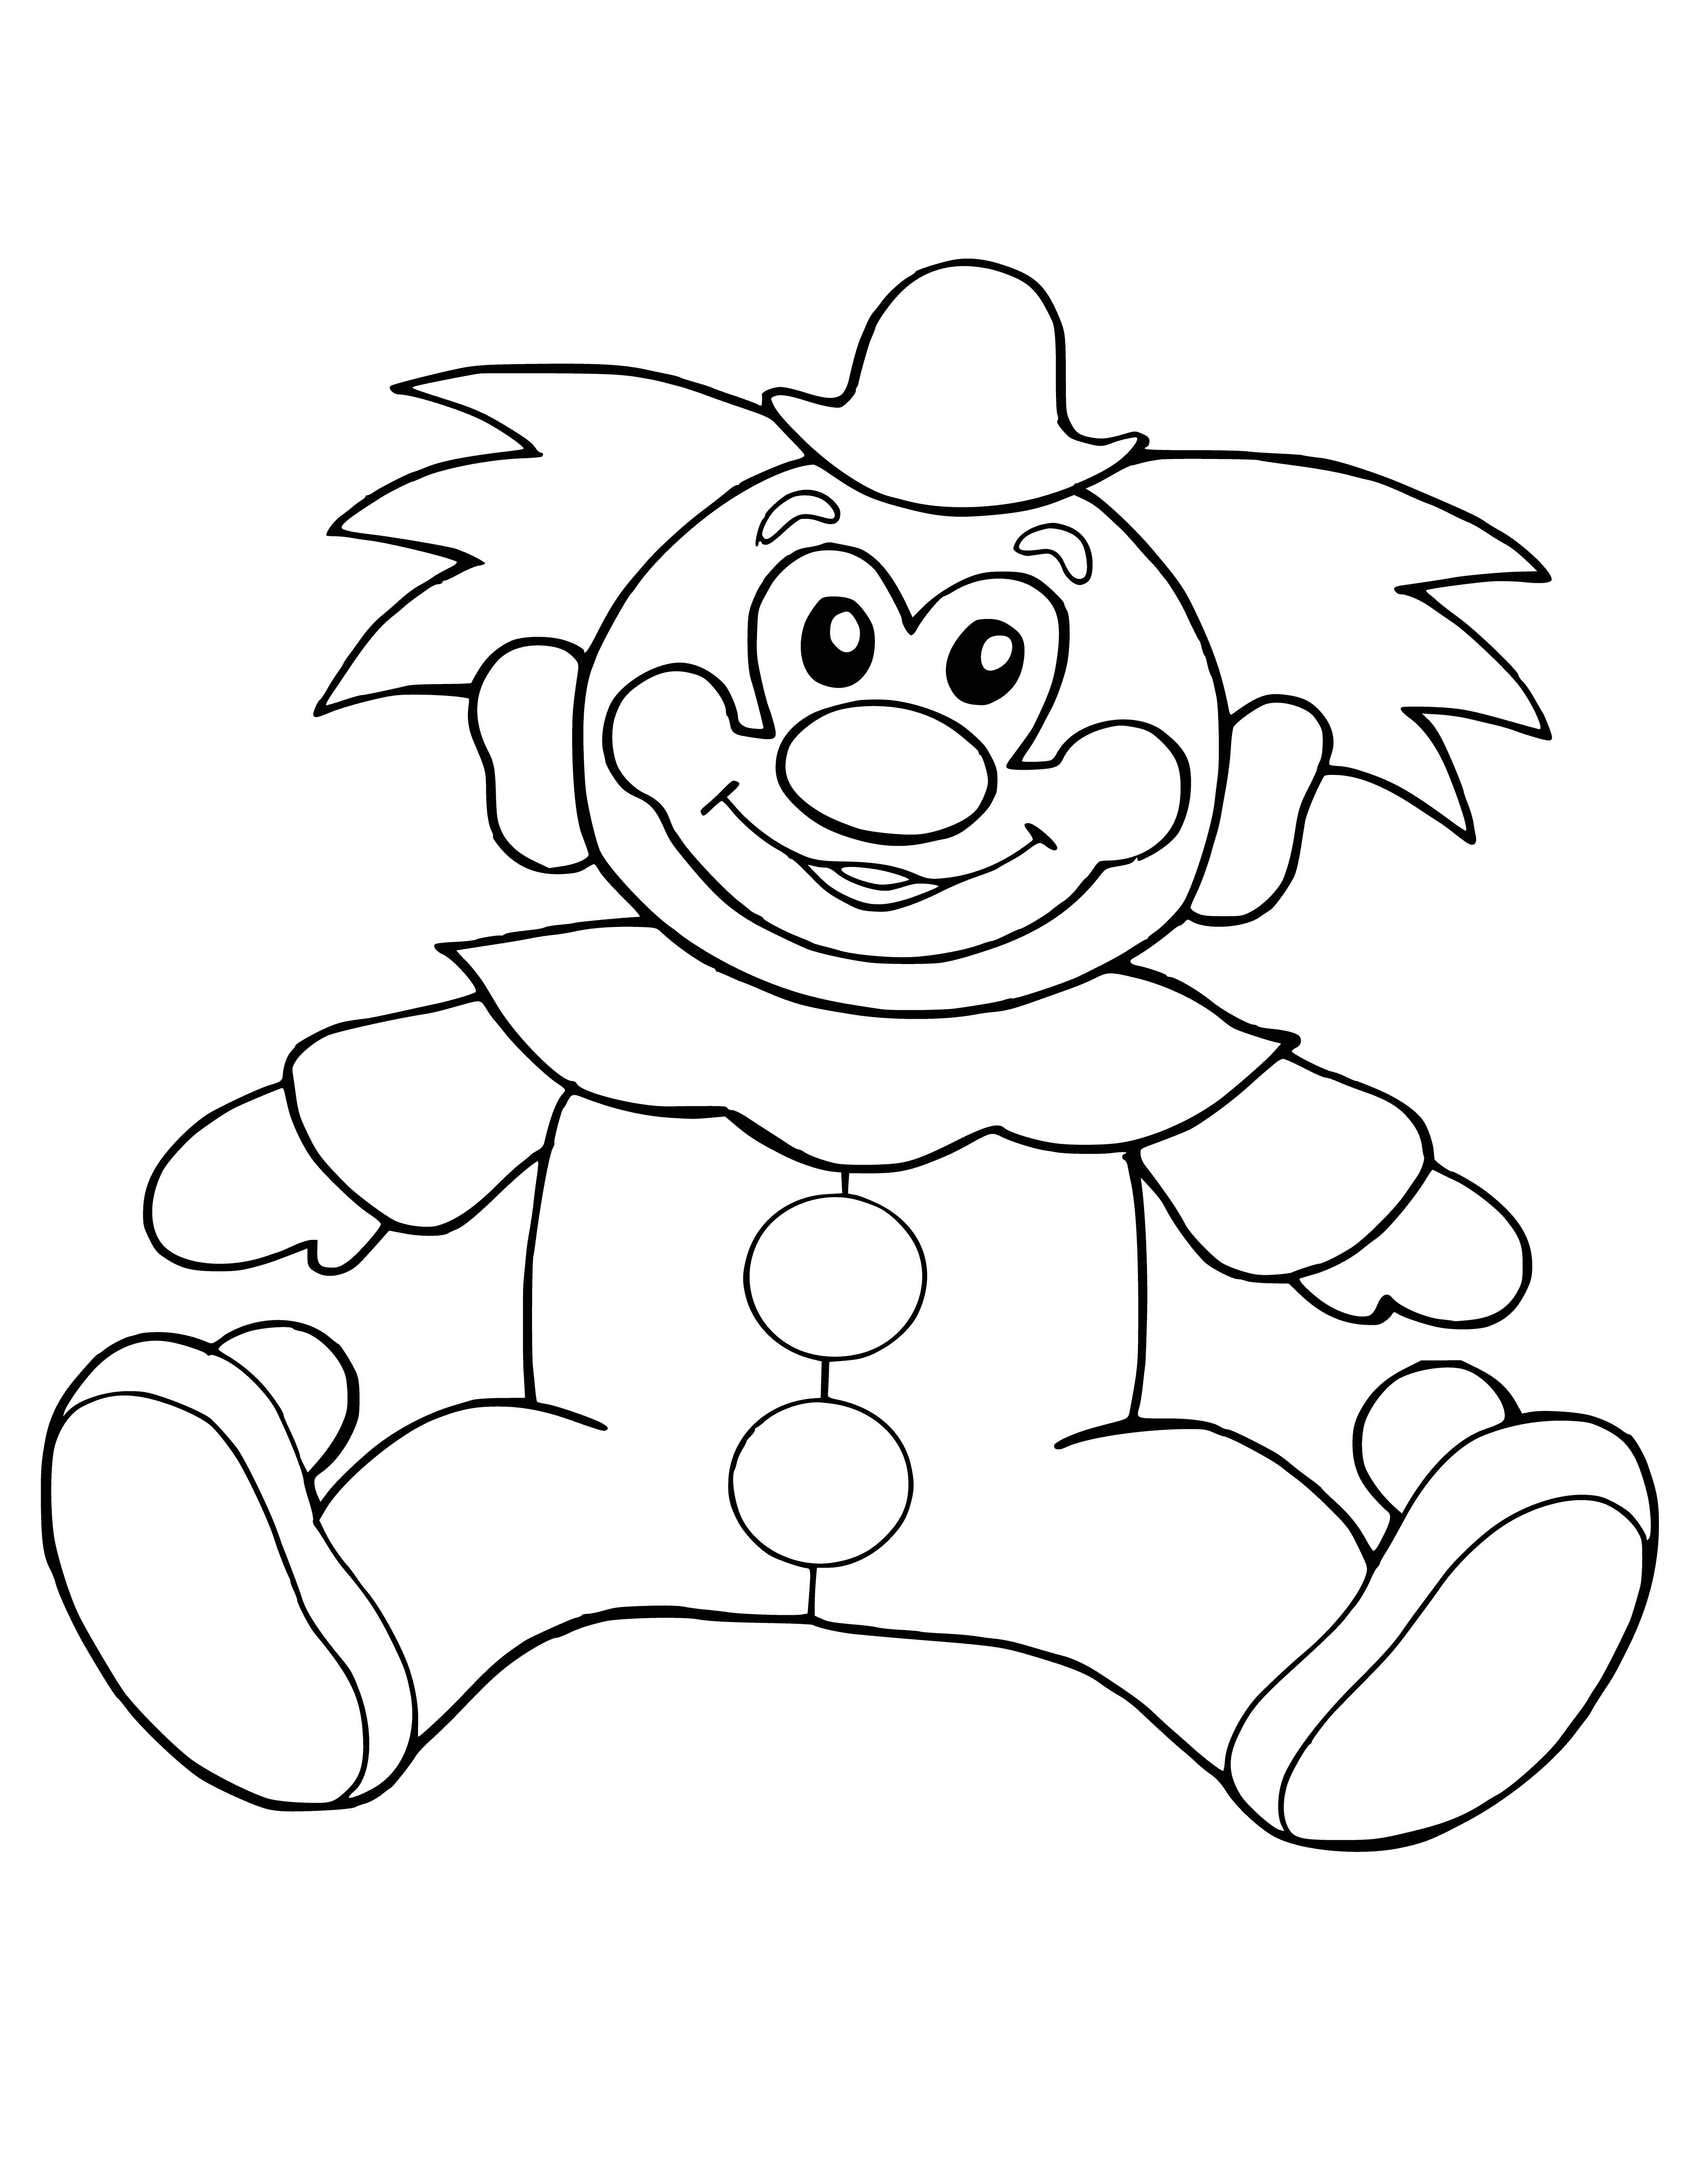 coloring page: Clown holds red ball, has red nose & striped shirt; happy expression. #clown #happy #ball